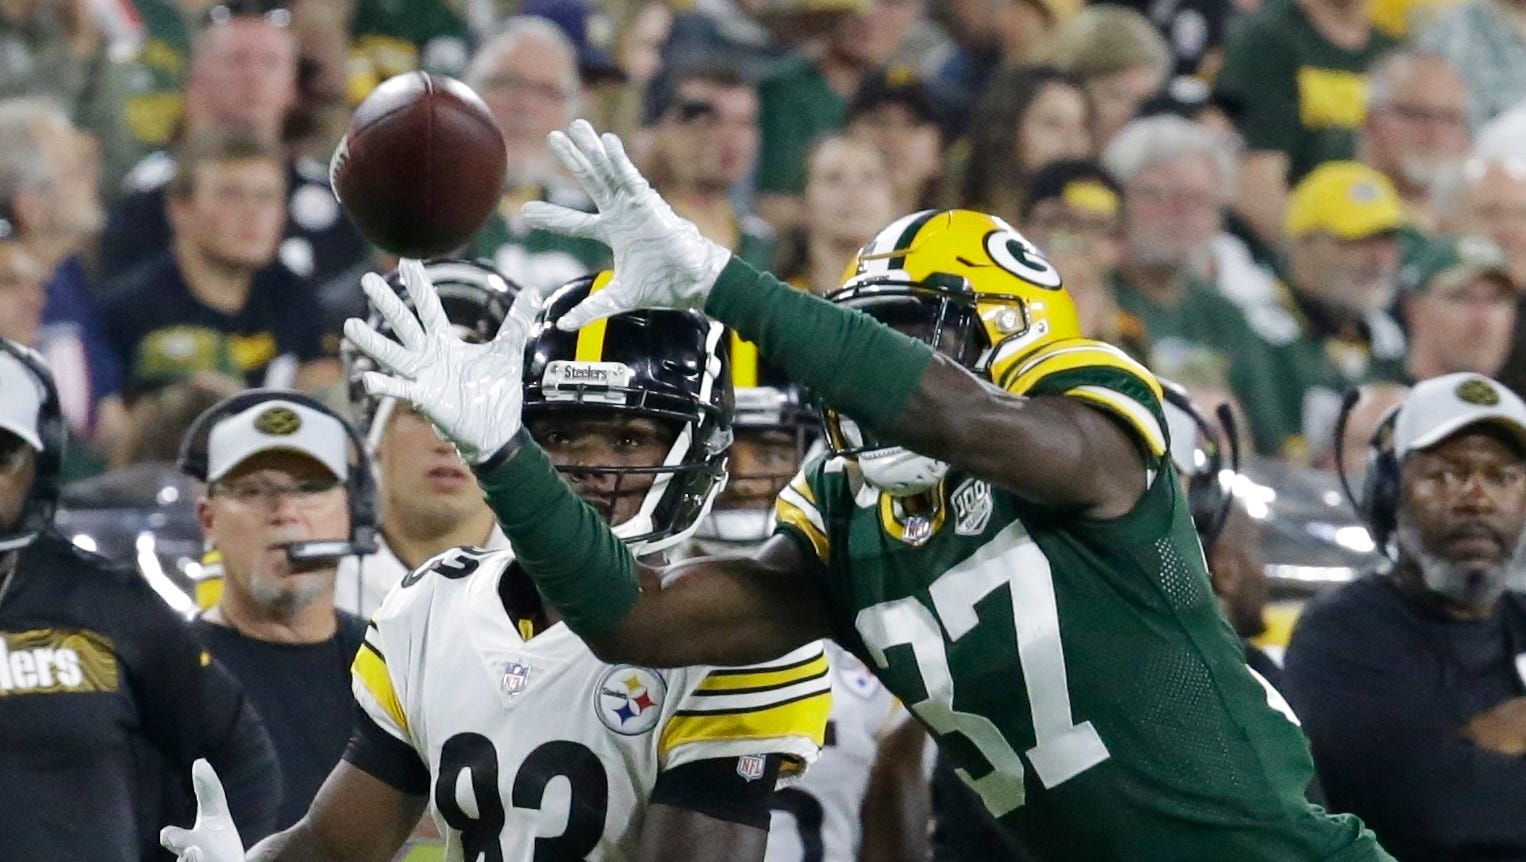 Green Bay Packers' Josh Jackson intercepts a pass in front of Pittsburgh Steelers' Damoun Patterson and returns it for a touchdown during the second half of a preseason NFL football game Thursday, Aug. 16, 2018, in Green Bay, Wis.